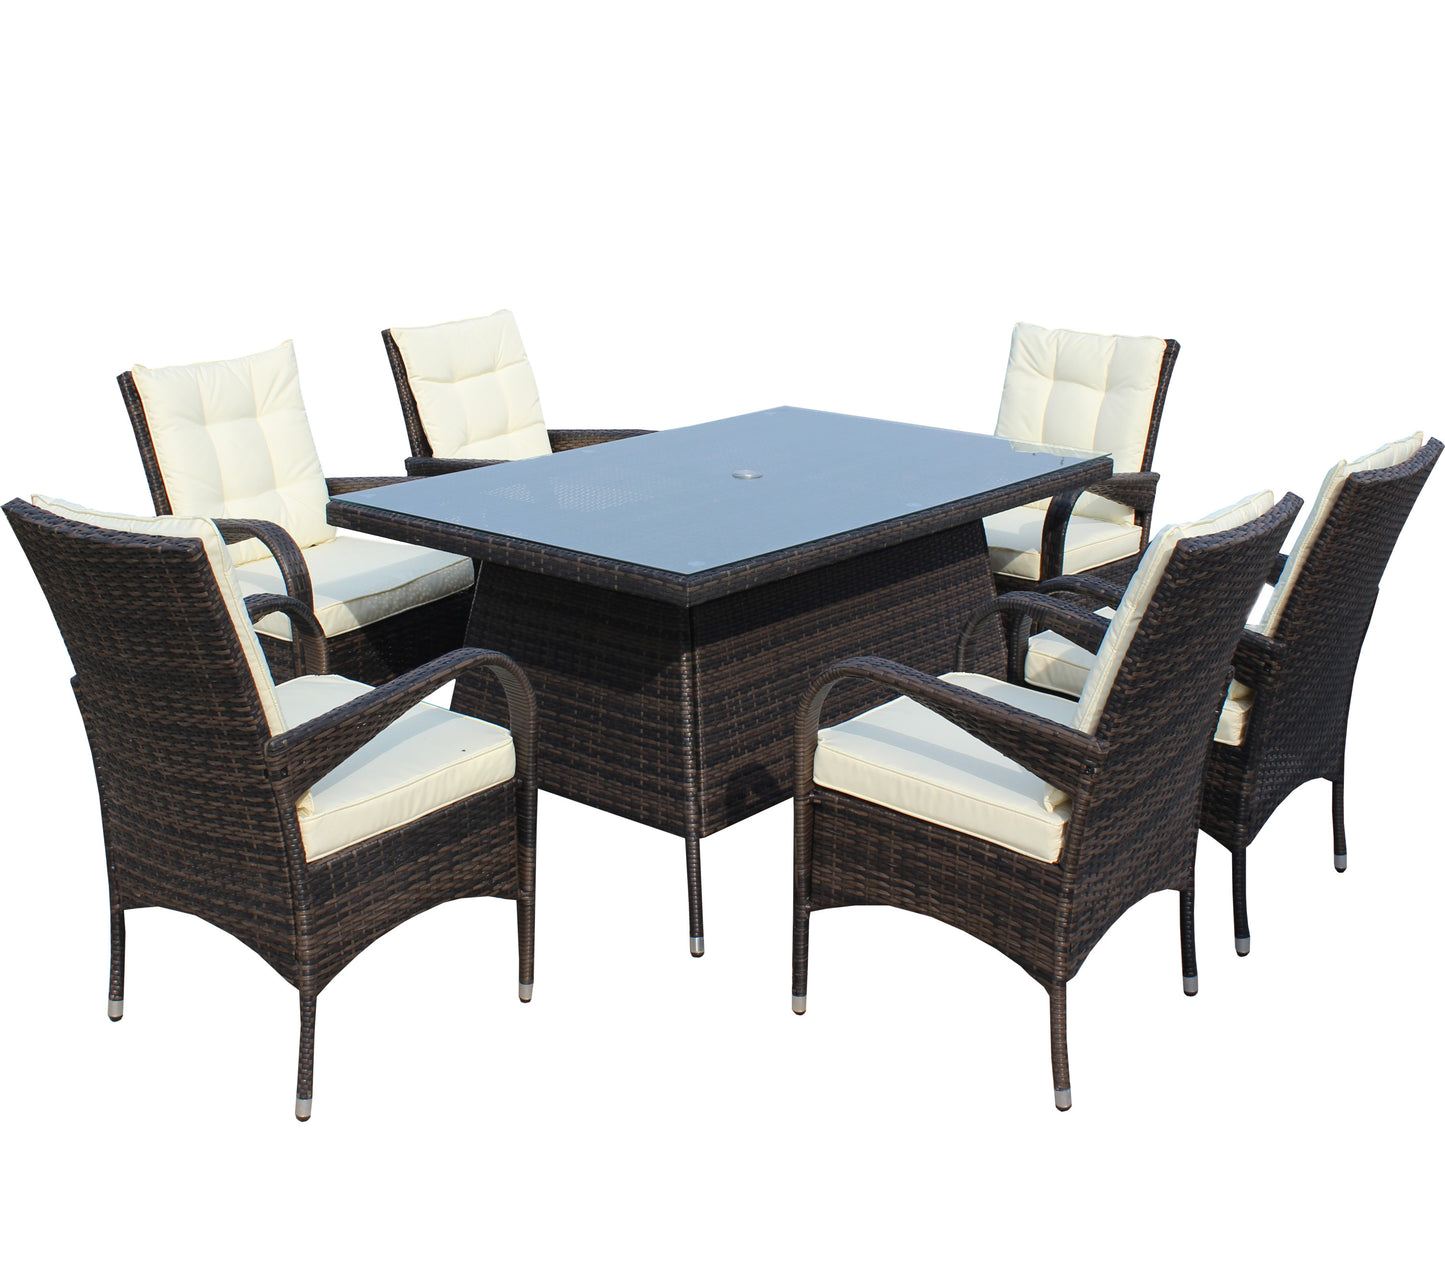 Patio 7-Piece Rectangular Dining Set with 6 Dining Chairs (Brown &Beige Cushion)